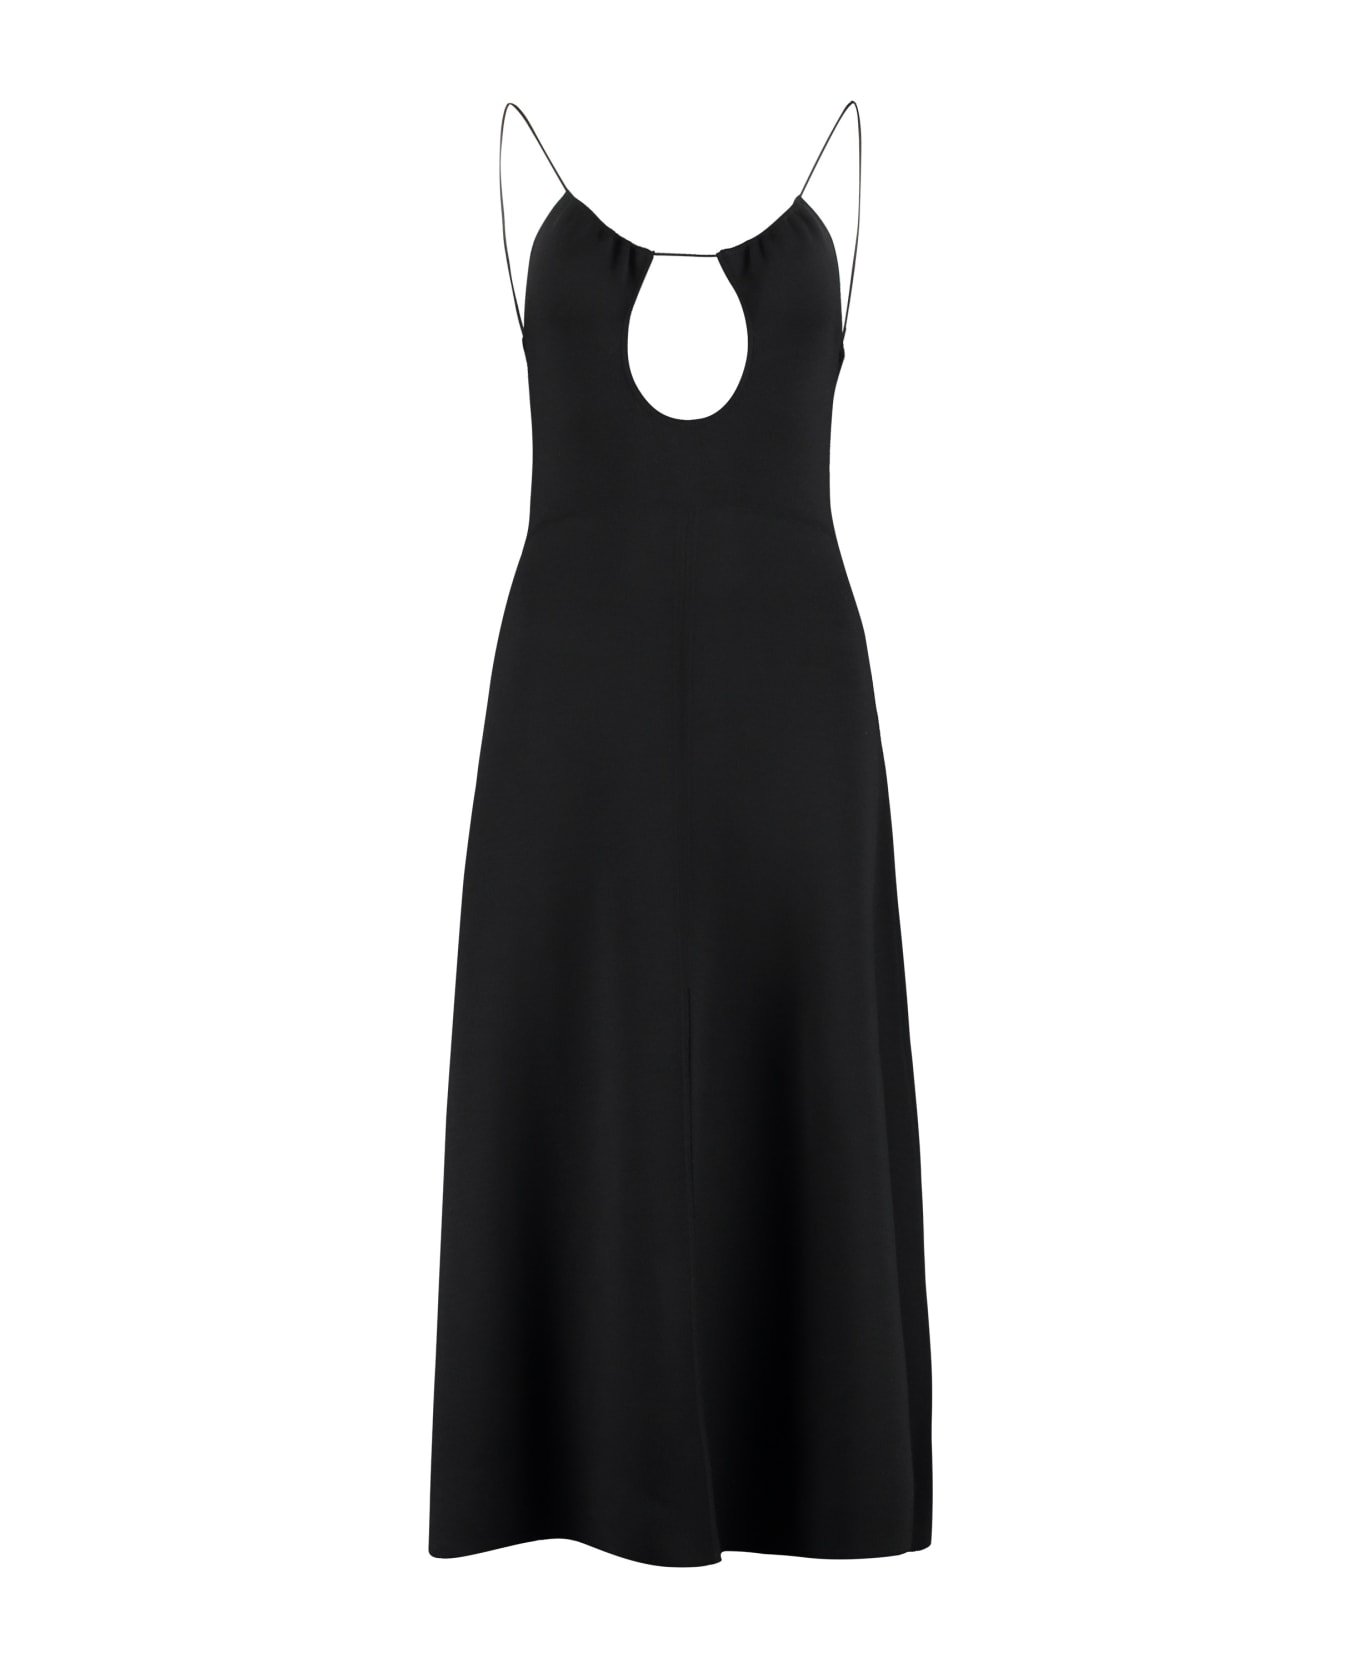 Saint Laurent Cut-out Detail Knitted Dress - NERO